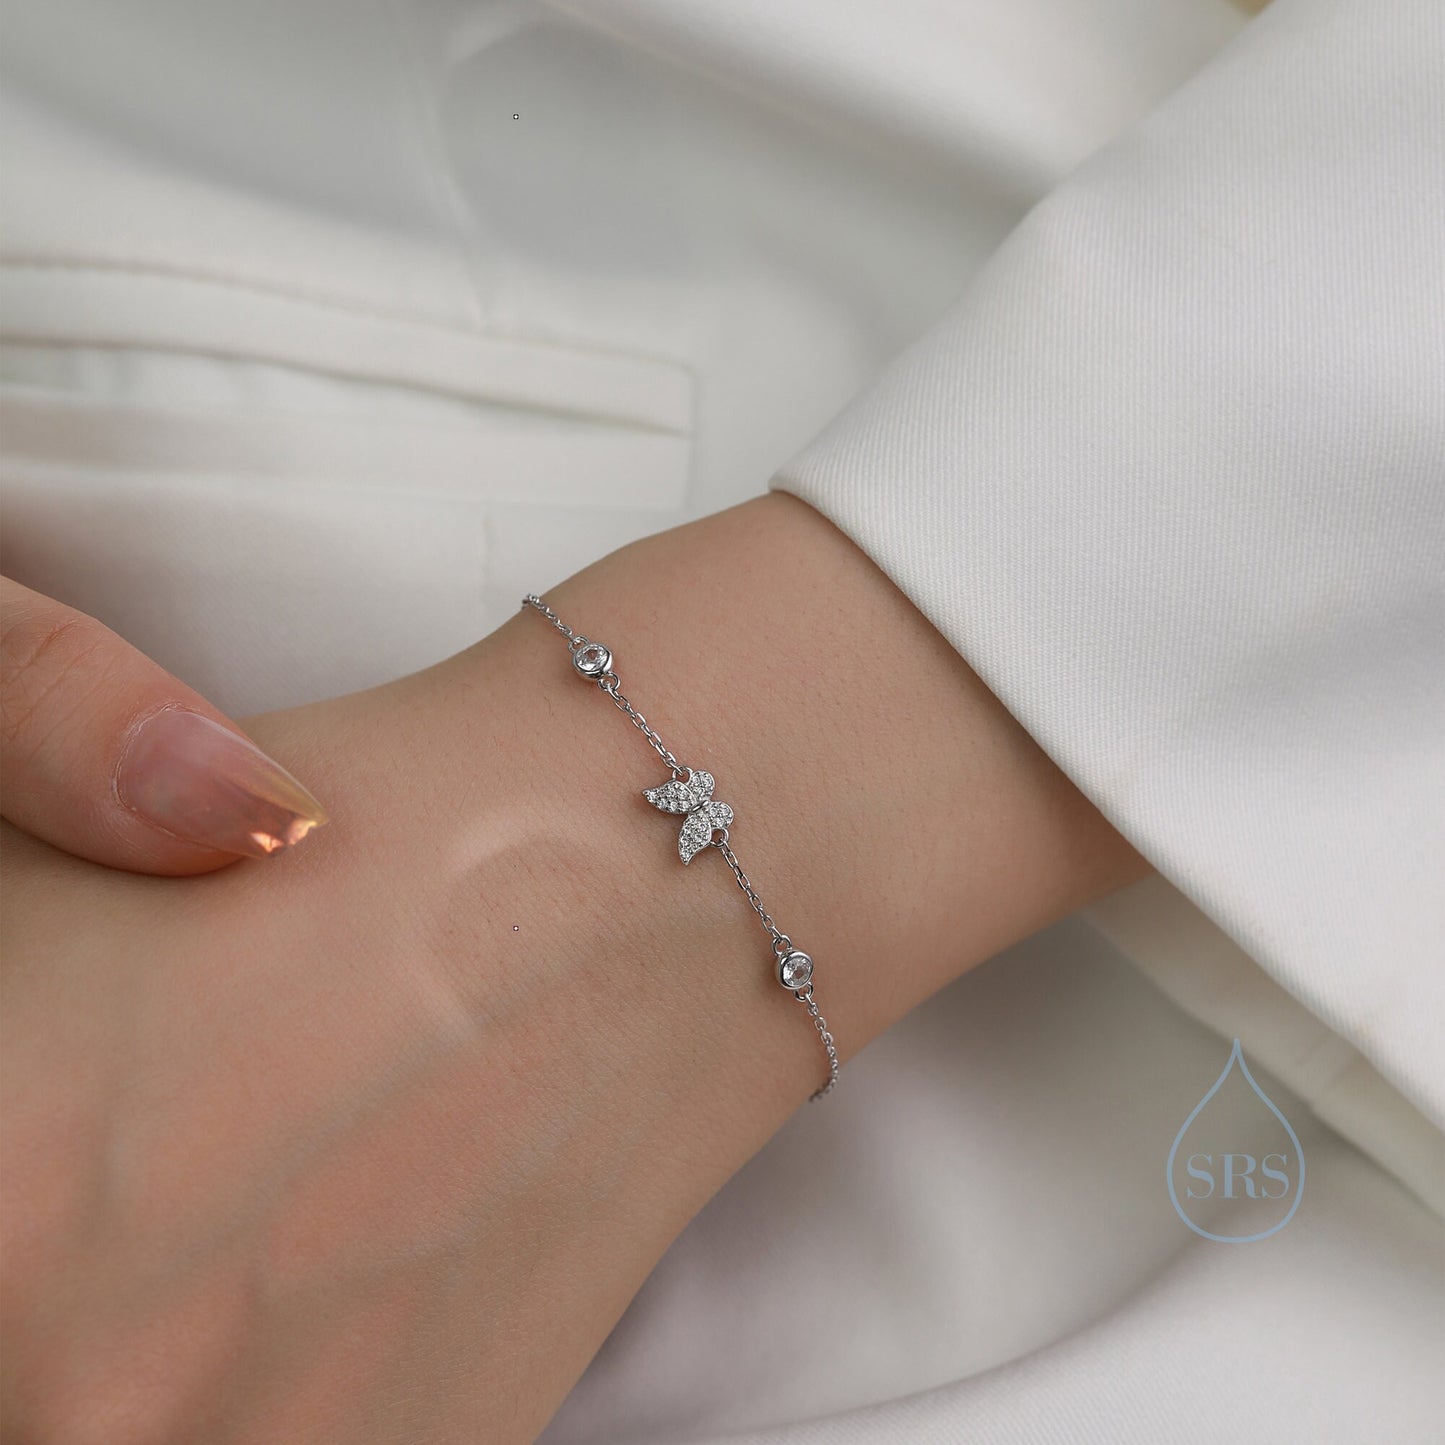 CZ and Crystal Butterfly Floating Bracelet in Sterling Silver, Silver or Gold or Rose gold, Satellite Bracelet, Solid Silver Bracelet